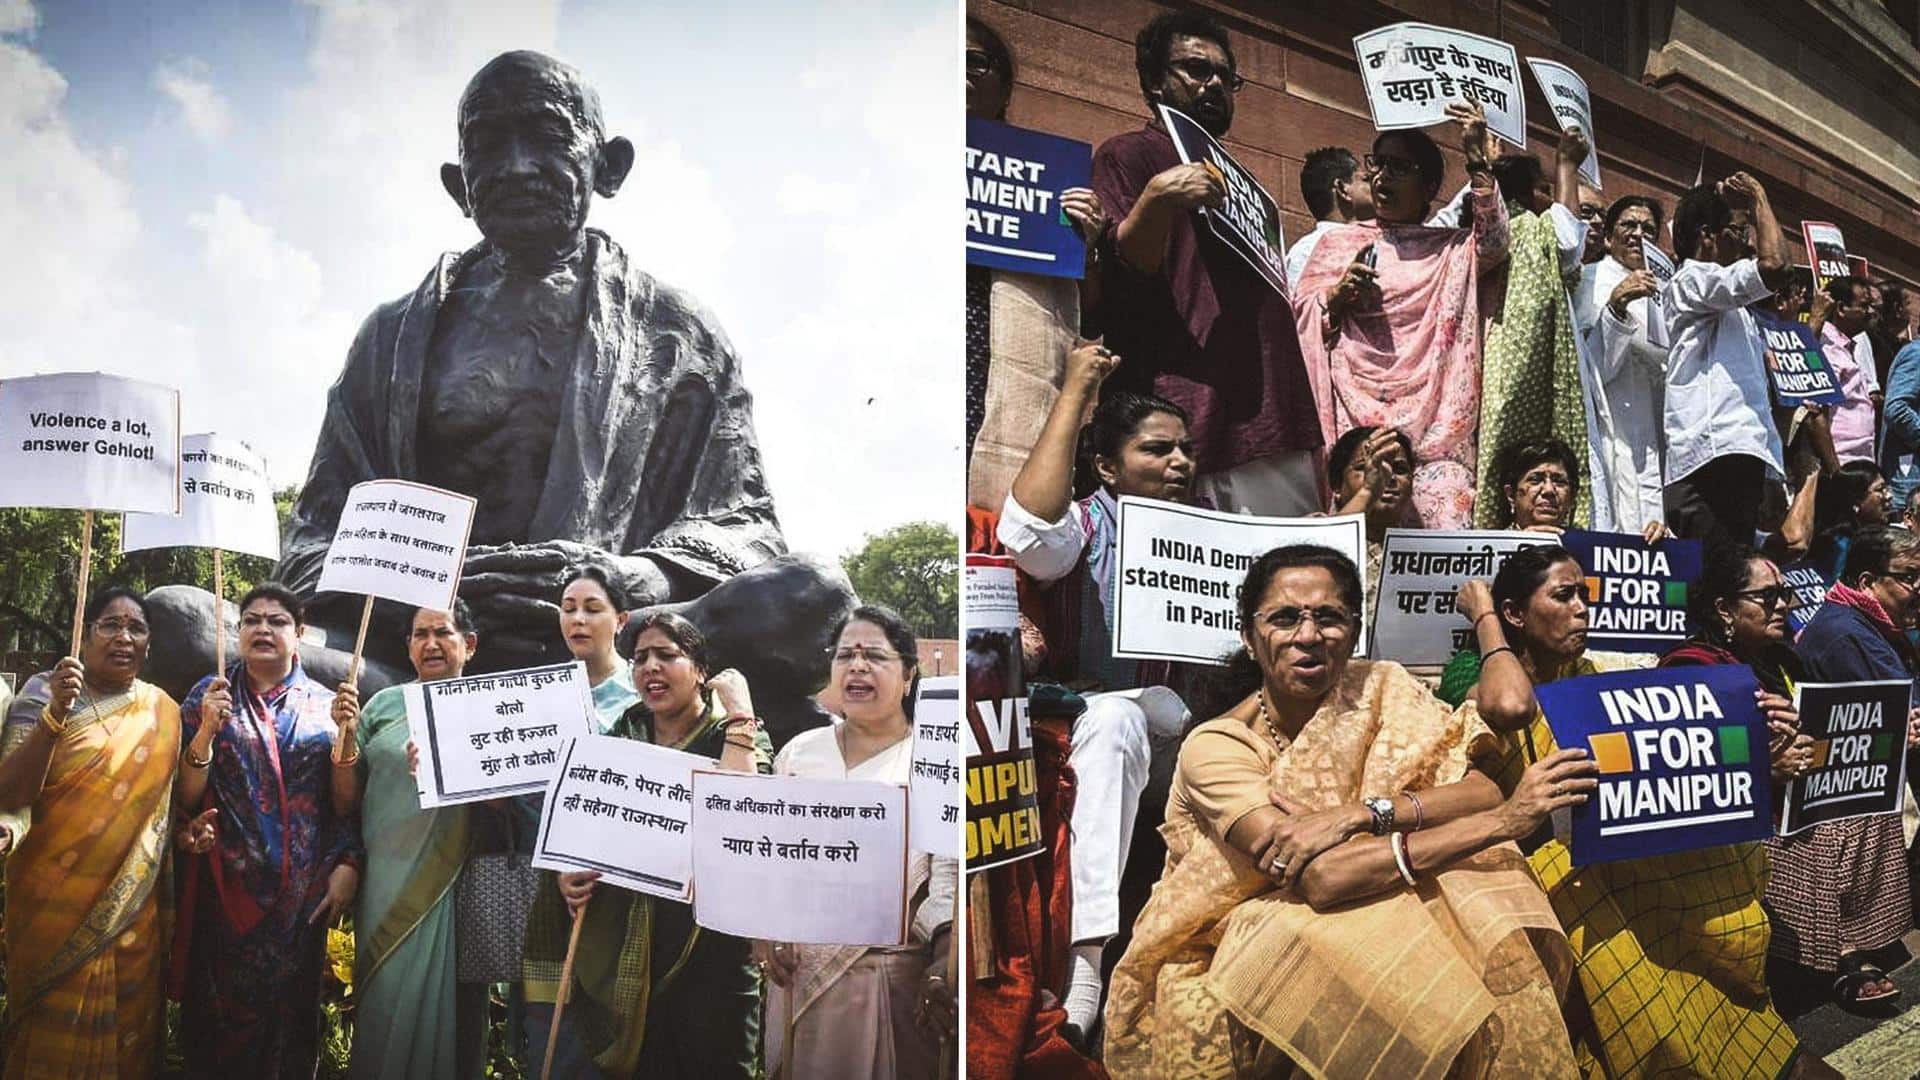 NDA, INDIA protest at Parliament amid stalemate over Manipur crisis